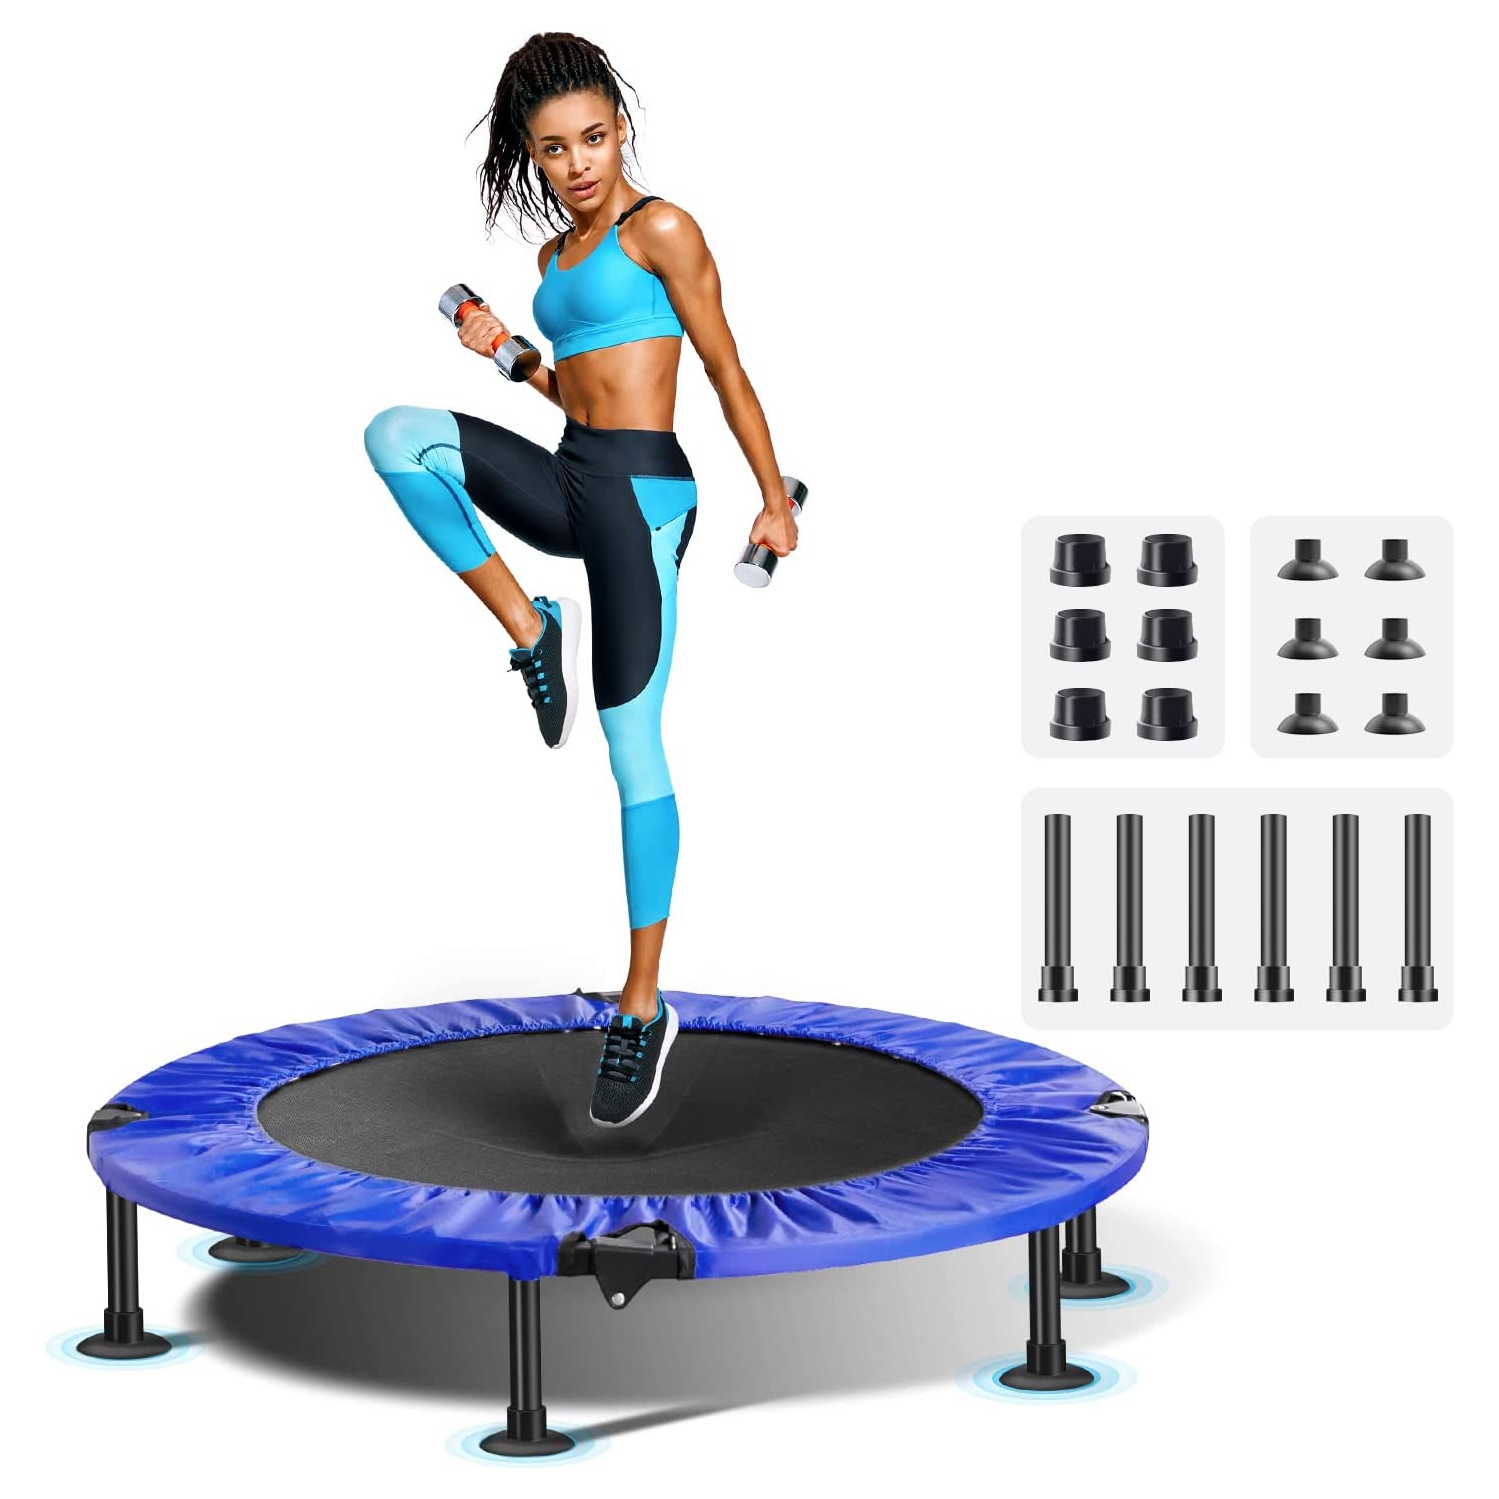 Toncur 40" Mini Trampoline with 6 Non-Slip Suction Cups, Quiet Fitness Equipment for Exercise, Home/Garden, Max Load 330 lbs